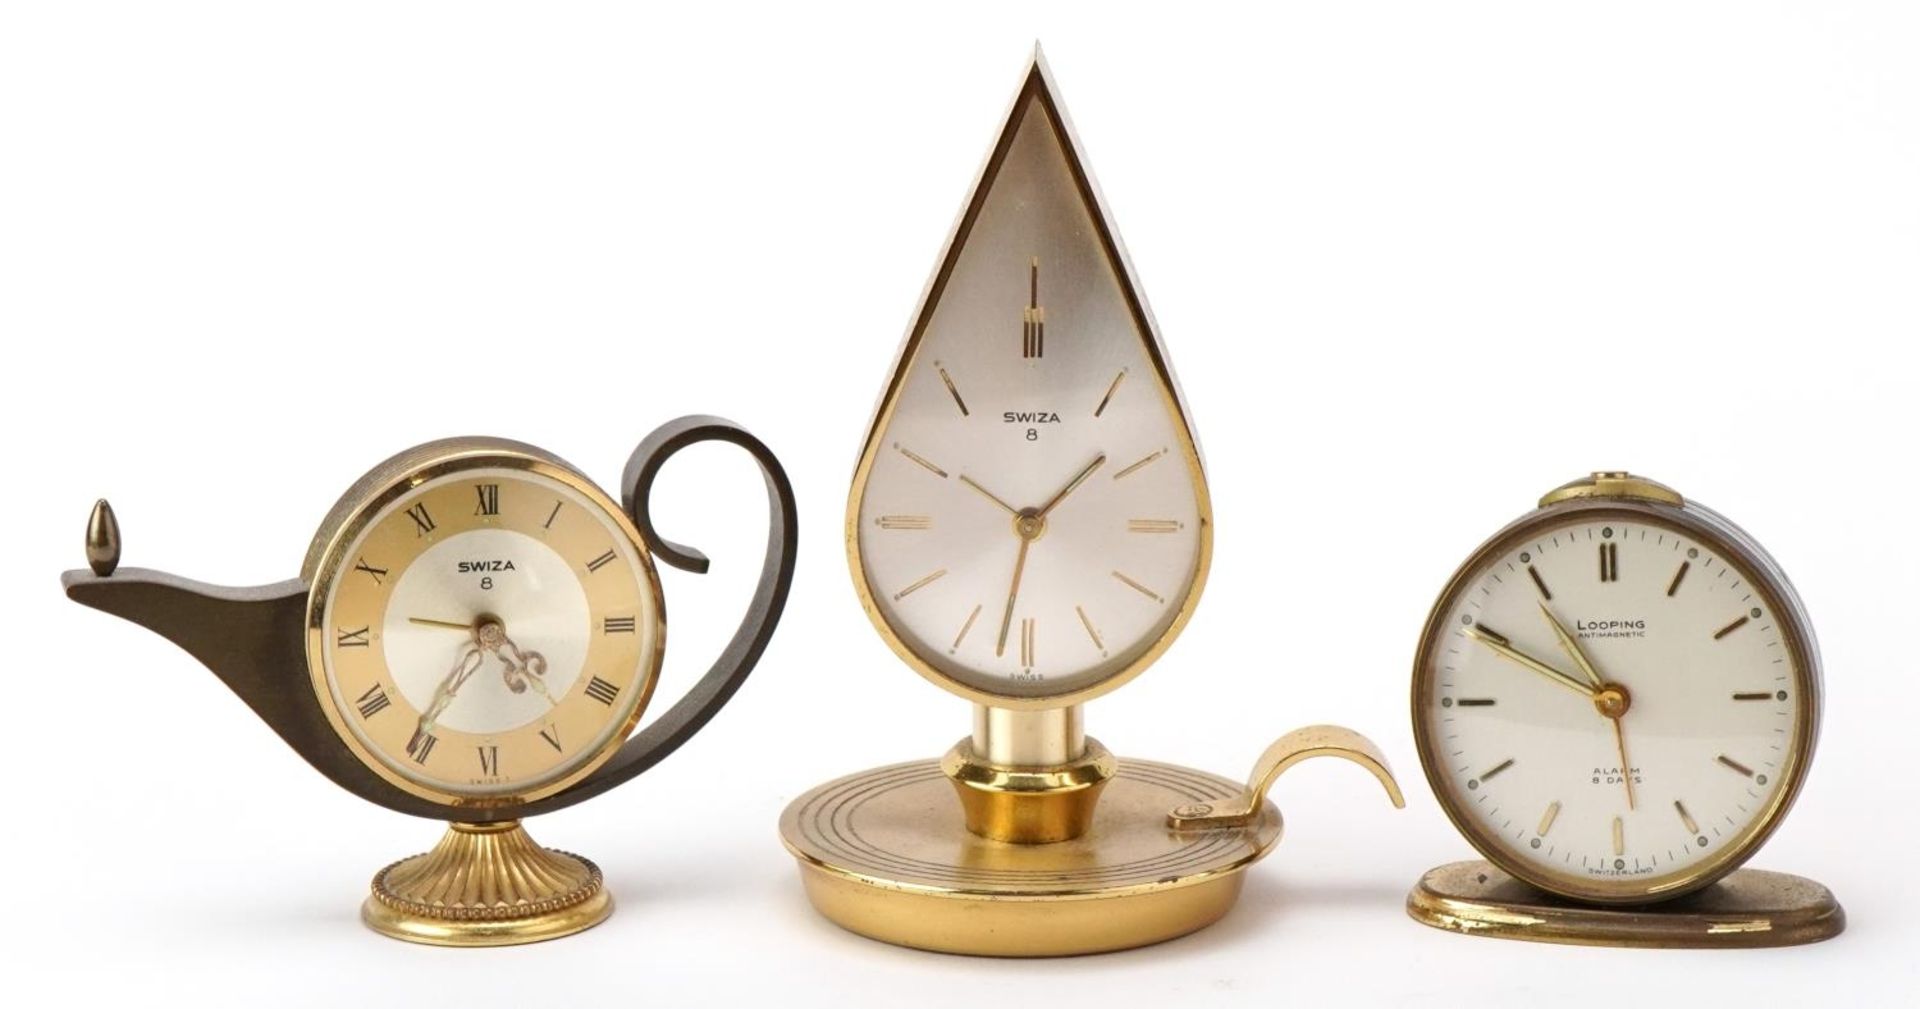 Two vintage Swiza clocks in the form of an oil lamp and chamber stick together with a Looping